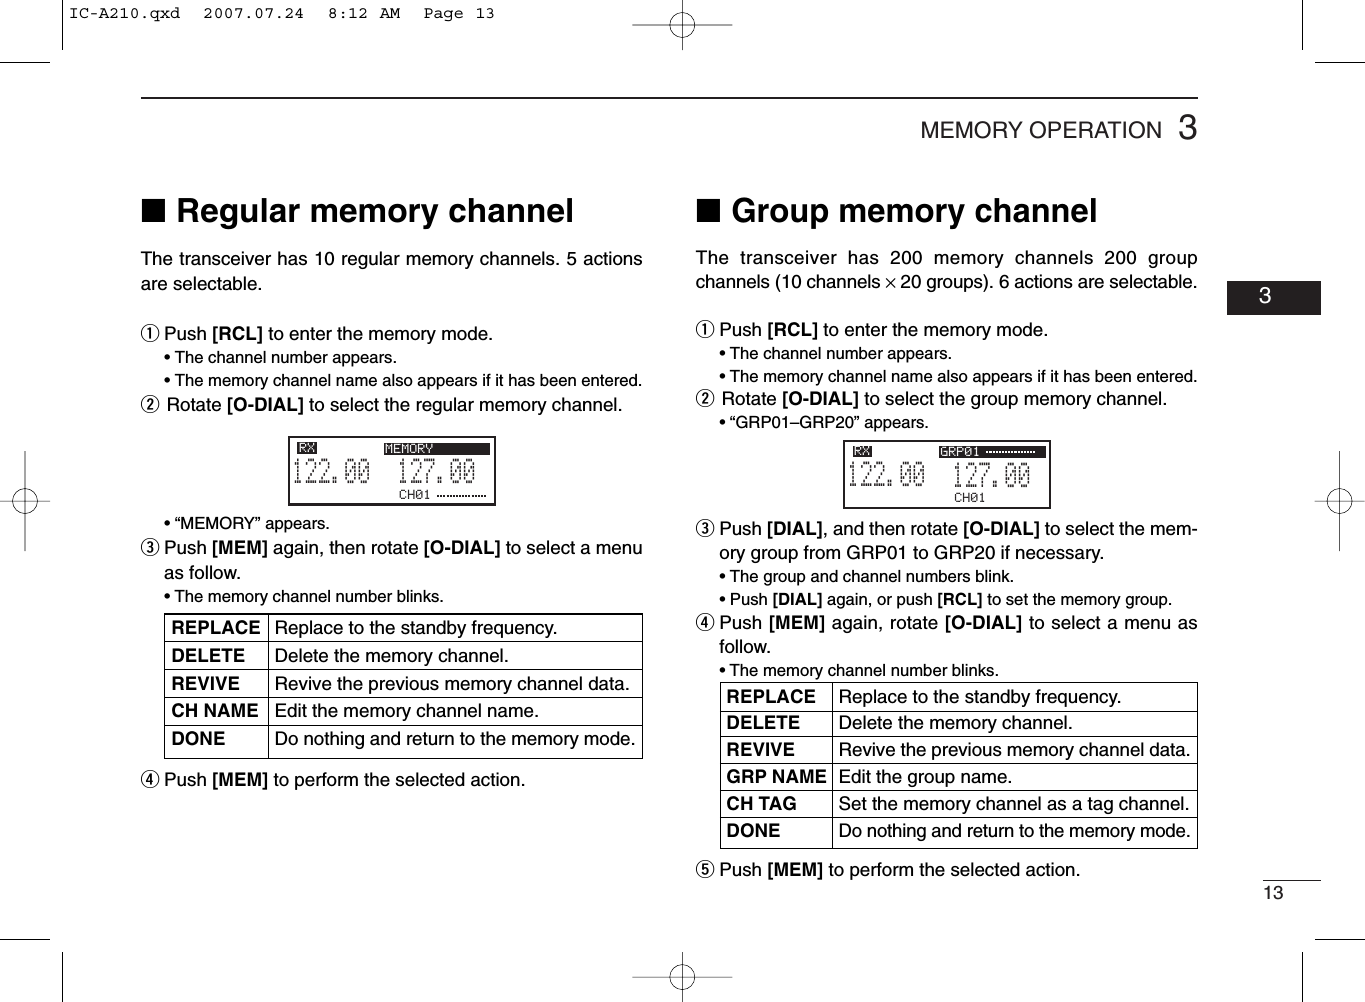 133MEMORY OPERATION03■Regular memory channelThe transceiver has 10 regular memory channels. 5 actionsare selectable.qPush [RCL] to enter the memory mode.• The channel number appears.• The memory channel name also appears if it has been entered.wRotate [O-DIAL] to select the regular memory channel.• “MEMORY” appears.ePush [MEM] again, then rotate [O-DIAL] to select a menuas follow.• The memory channel number blinks.rPush [MEM] to perform the selected action.■Group memory channelThe transceiver has 200 memory channels 200 groupchannels (10 channels ×20 groups). 6 actions are selectable.qPush [RCL] to enter the memory mode.• The channel number appears.• The memory channel name also appears if it has been entered.wRotate [O-DIAL] to select the group memory channel.• “GRP01–GRP20” appears.ePush [DIAL], and then rotate [O-DIAL] to select the mem-ory group from GRP01 to GRP20 if necessary.• The group and channel numbers blink.• Push [DIAL] again, or push [RCL] to set the memory group.rPush [MEM] again, rotate [O-DIAL] to select a menu asfollow.• The memory channel number blinks.tPush [MEM] to perform the selected action.CH01127.005122.00RX GRP01CH01127.005122.00RX MEMORYREPLACE Replace to the standby frequency.DELETE Delete the memory channel.REVIVE Revive the previous memory channel data.CH NAME Edit the memory channel name.DONE Do nothing and return to the memory mode.REPLACE Replace to the standby frequency.DELETE Delete the memory channel.REVIVE Revive the previous memory channel data.GRP NAME Edit the group name.CH TAG Set the memory channel as a tag channel.DONEDo nothing and return to the memory mode.IC-A210.qxd  2007.07.24  8:12 AM  Page 13